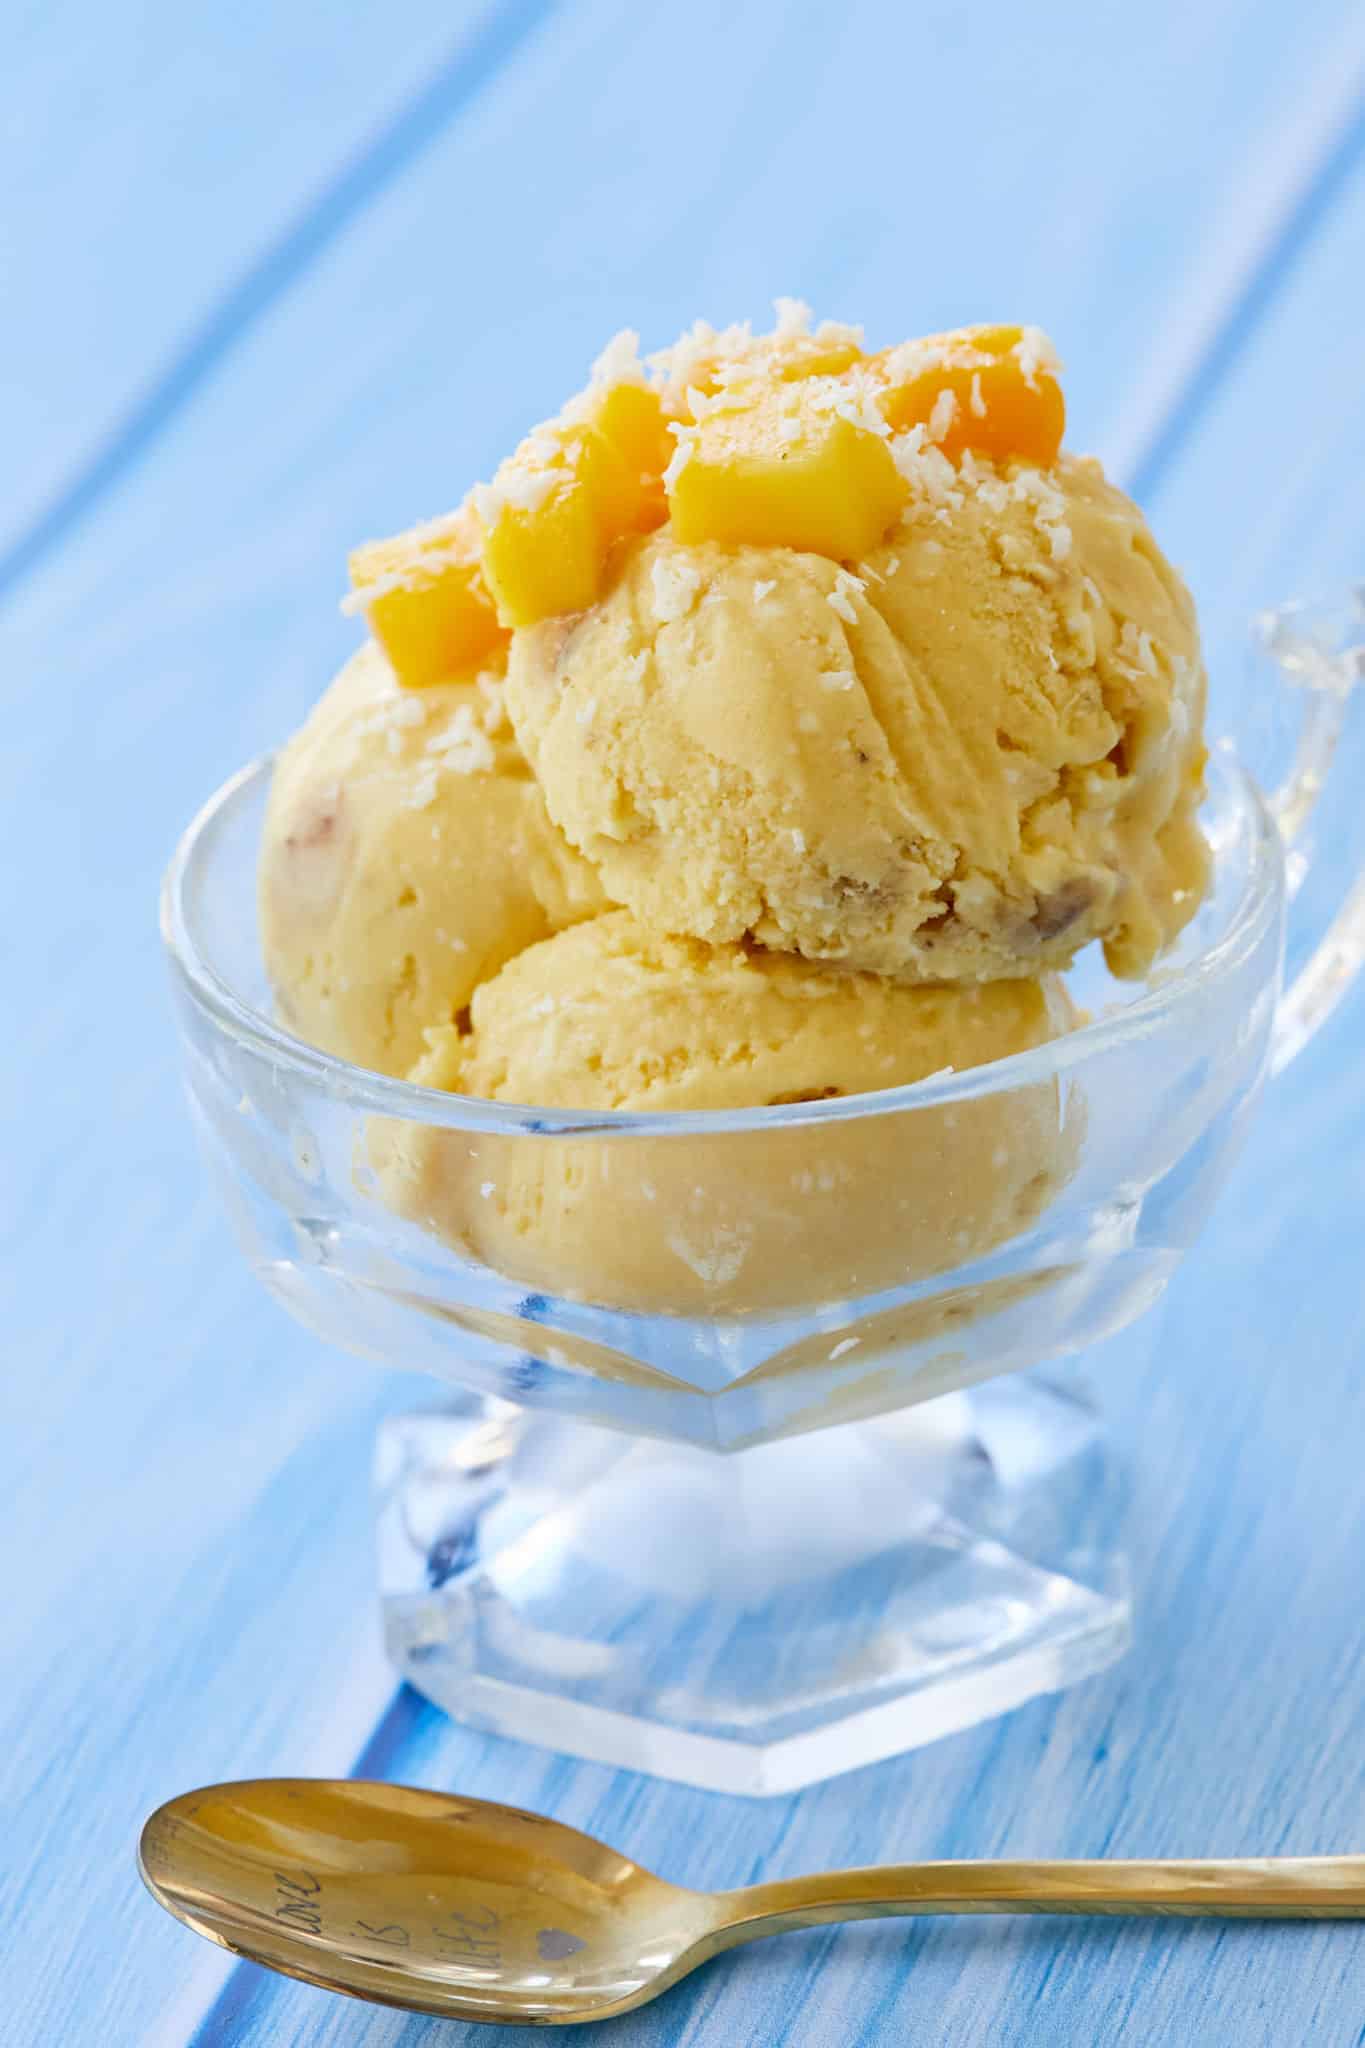 Homemade Mango Coconut Ice Cream For Breakfast is scooped inside of a glass serving cup. The ice cream is topped with mango and coconut shavings. A spoon that reads "Love is Life" rests next to the bowl of ice cream.